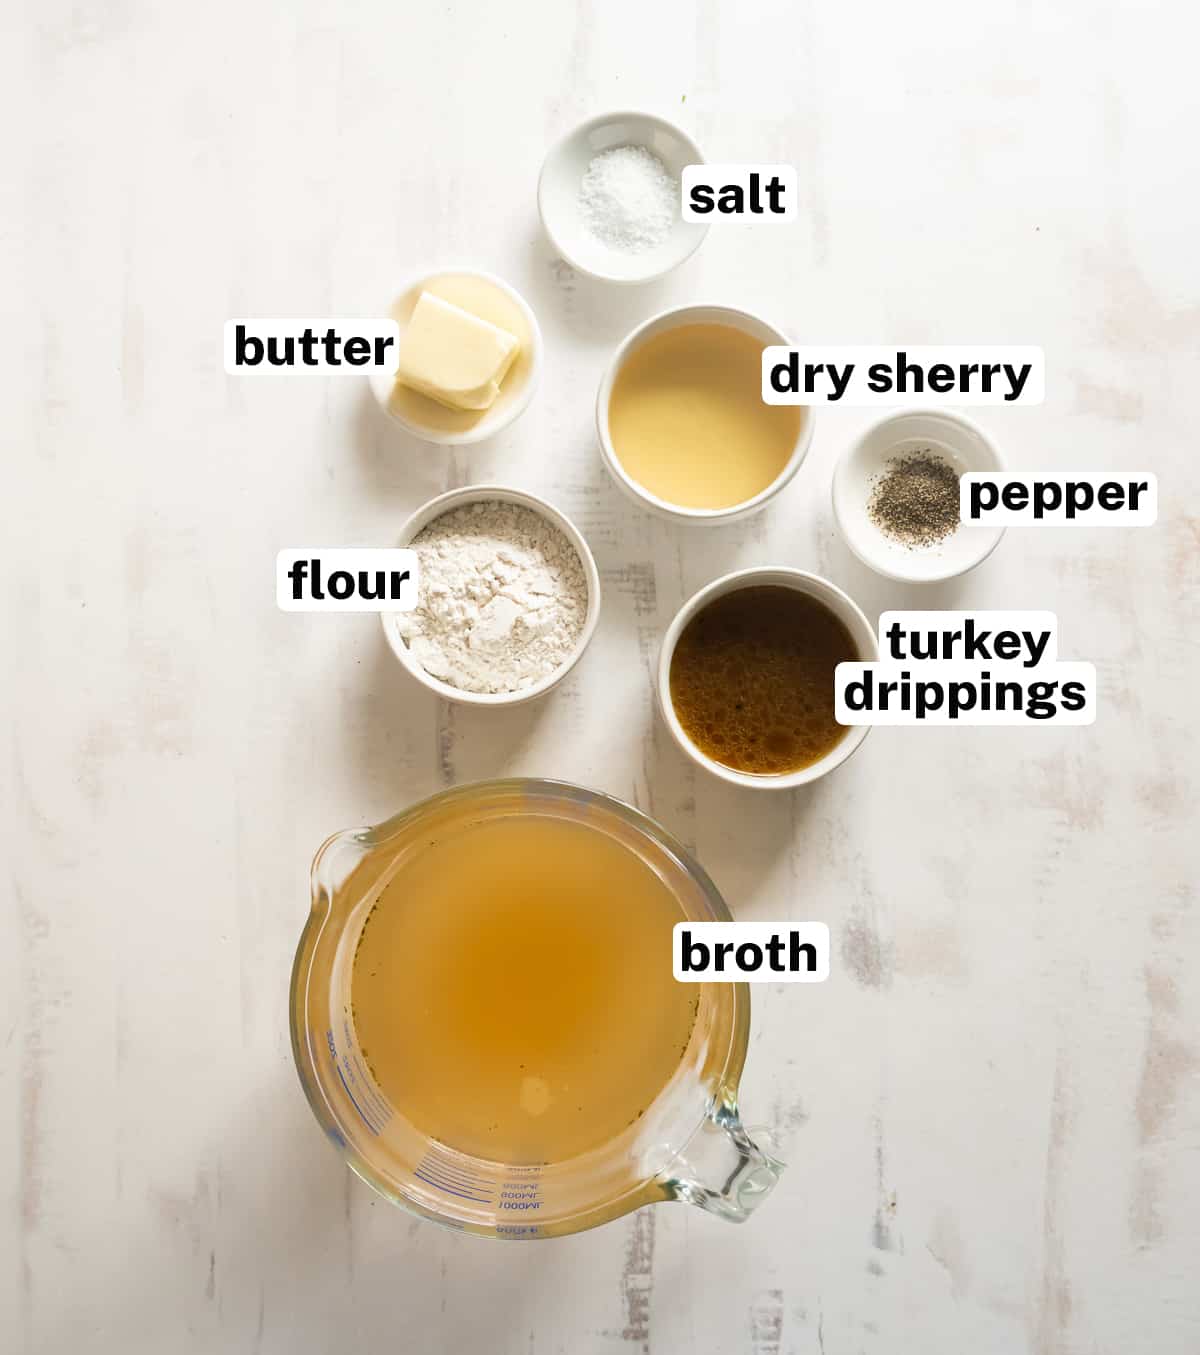 The ingredients to make turkey gravy with overlay text.